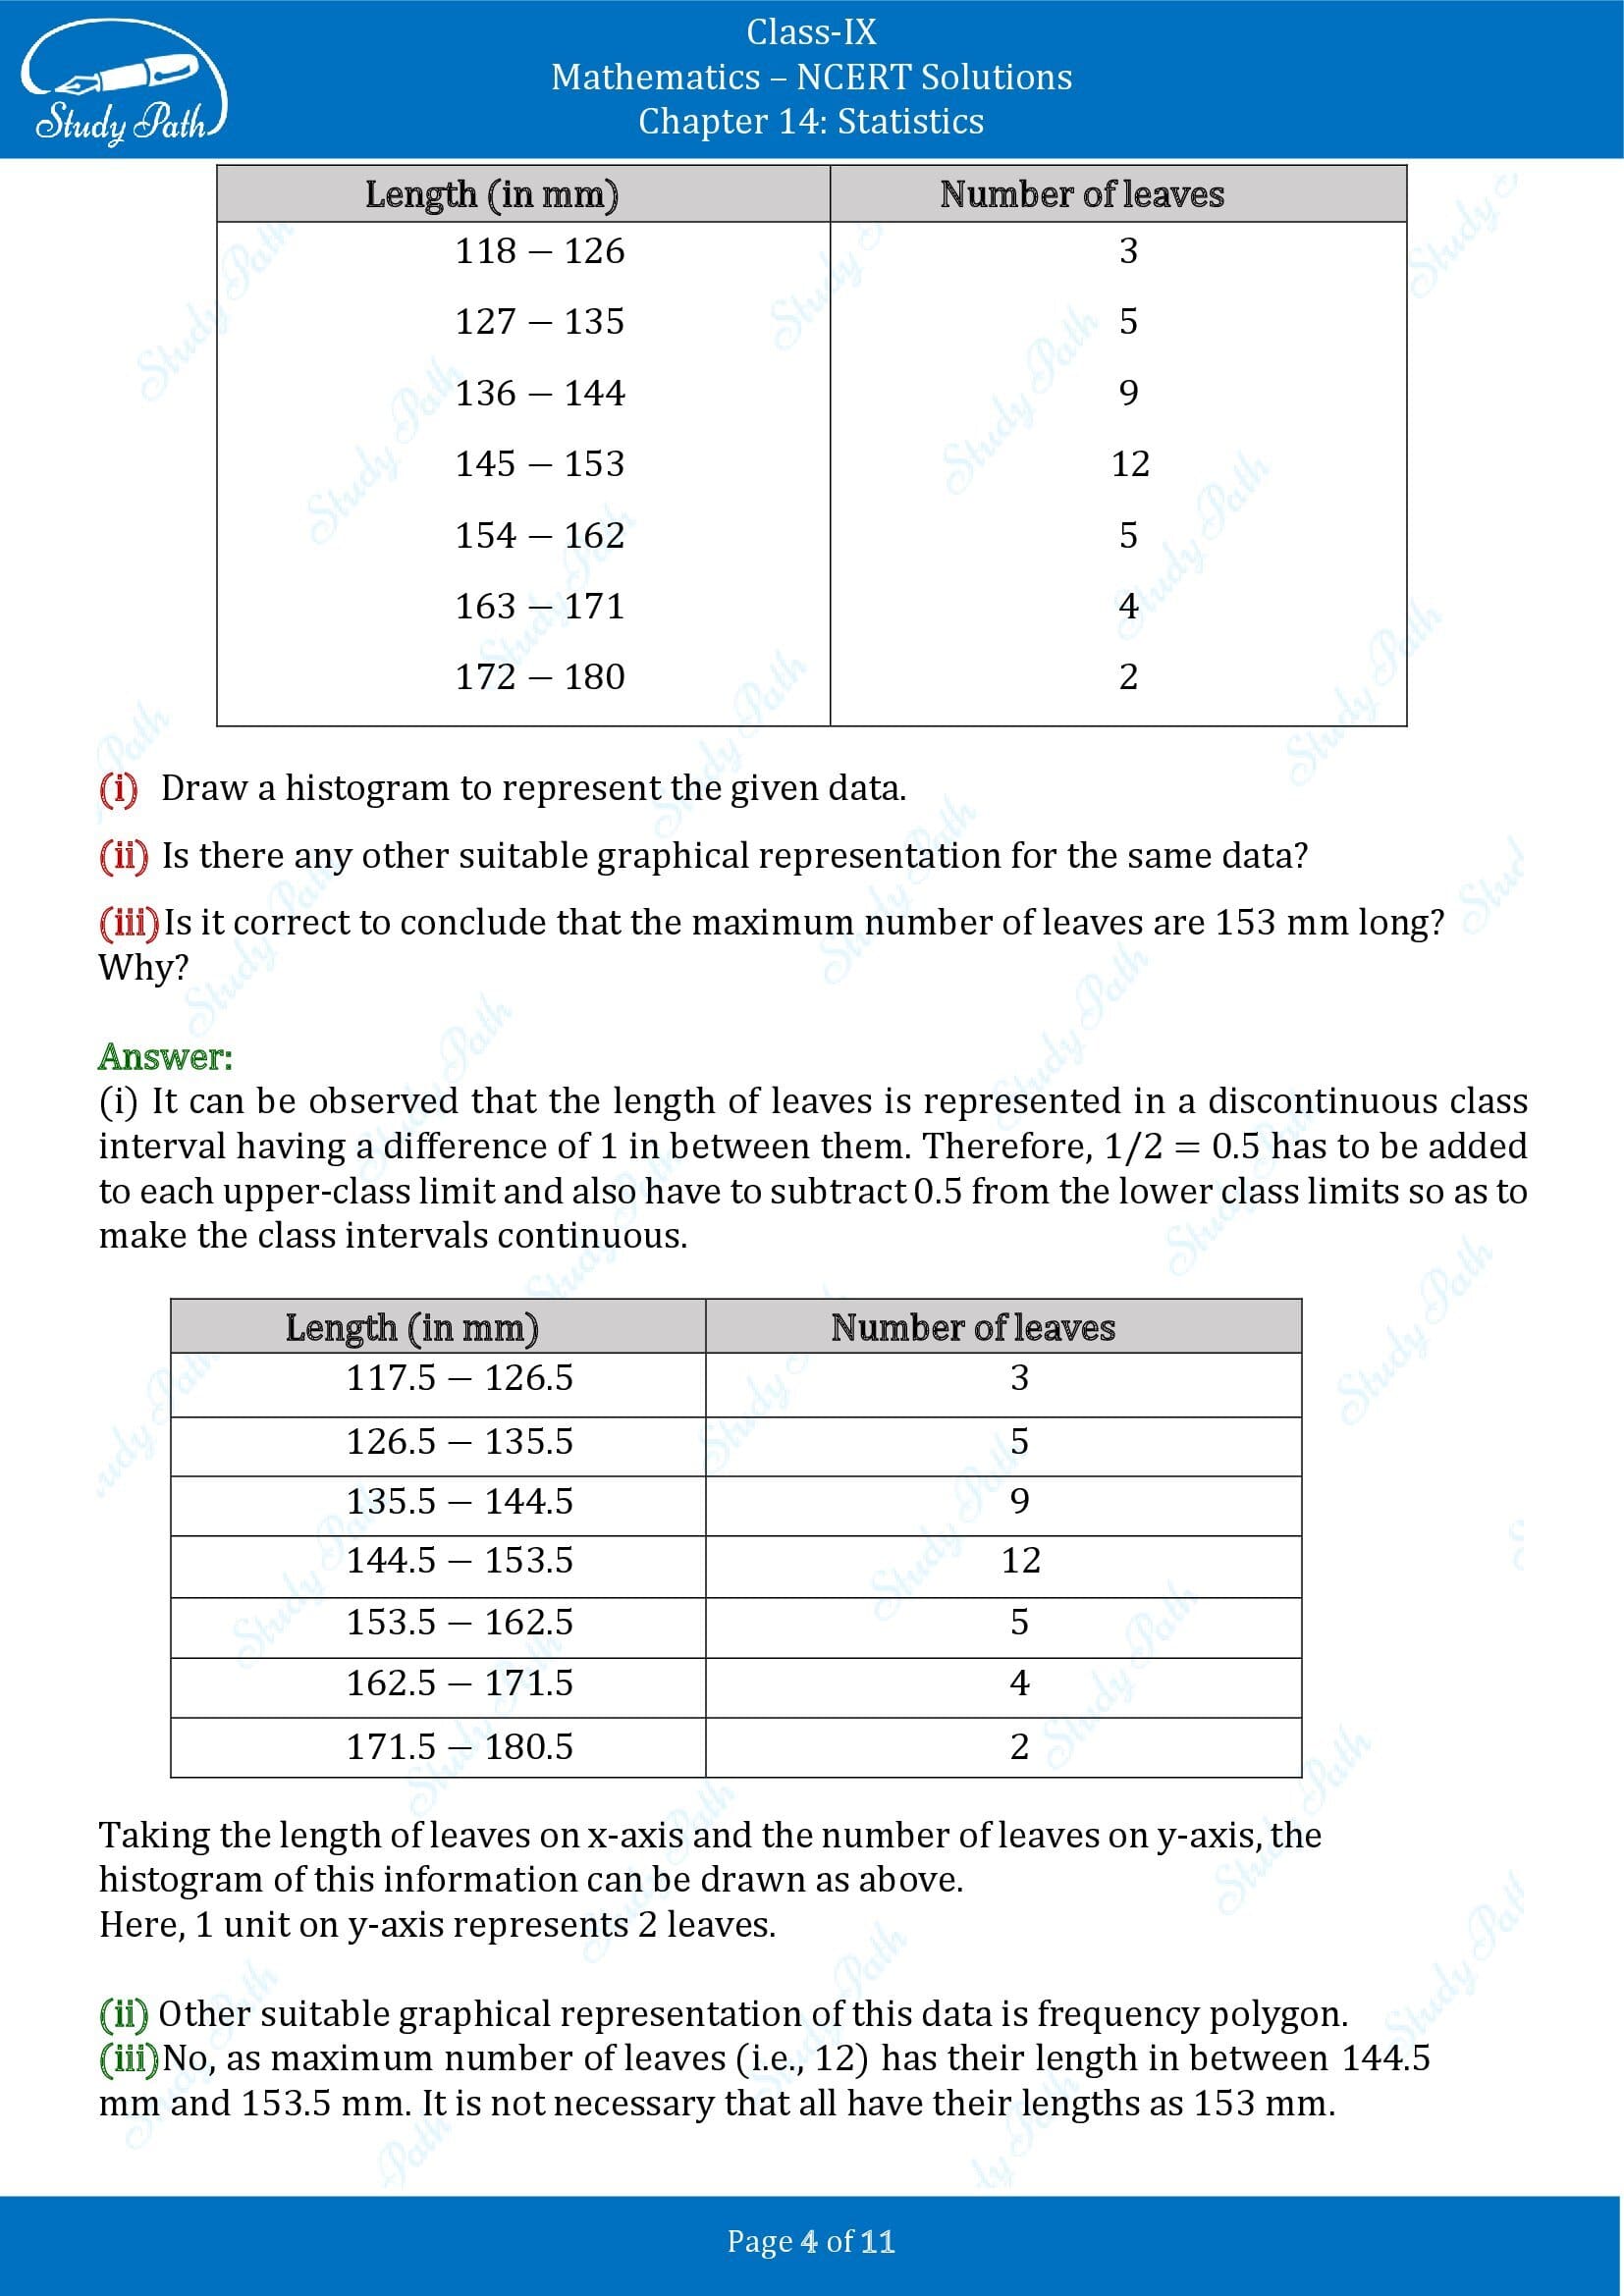 NCERT Solutions for Class 9 Maths Chapter 14 Statistics Exercise 14.3 00004